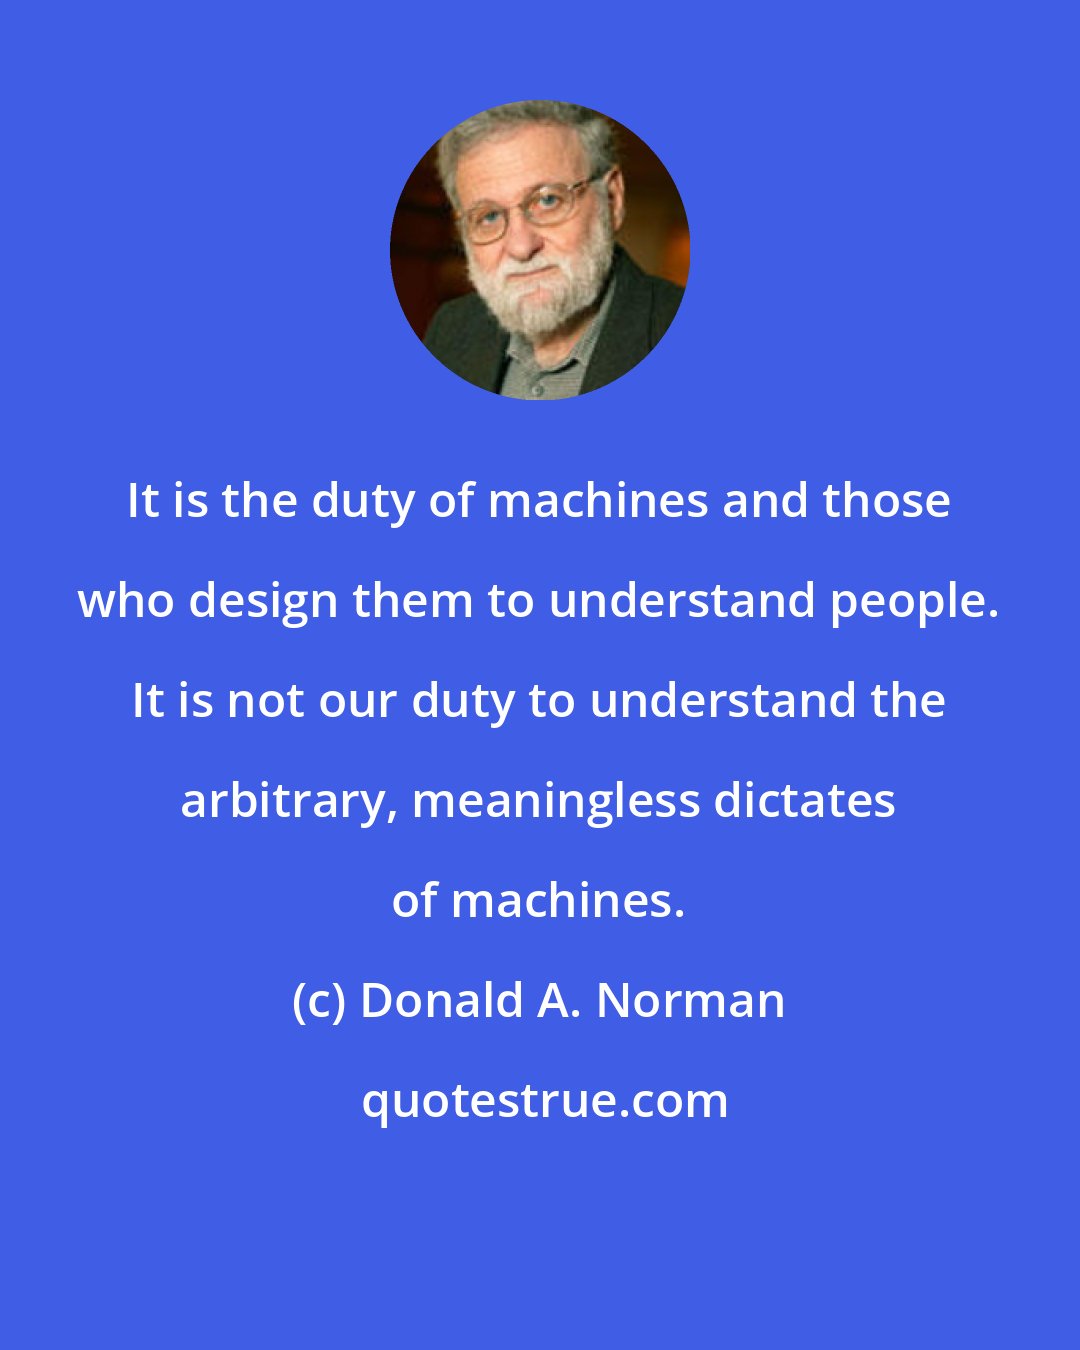 Donald A. Norman: It is the duty of machines and those who design them to understand people. It is not our duty to understand the arbitrary, meaningless dictates of machines.